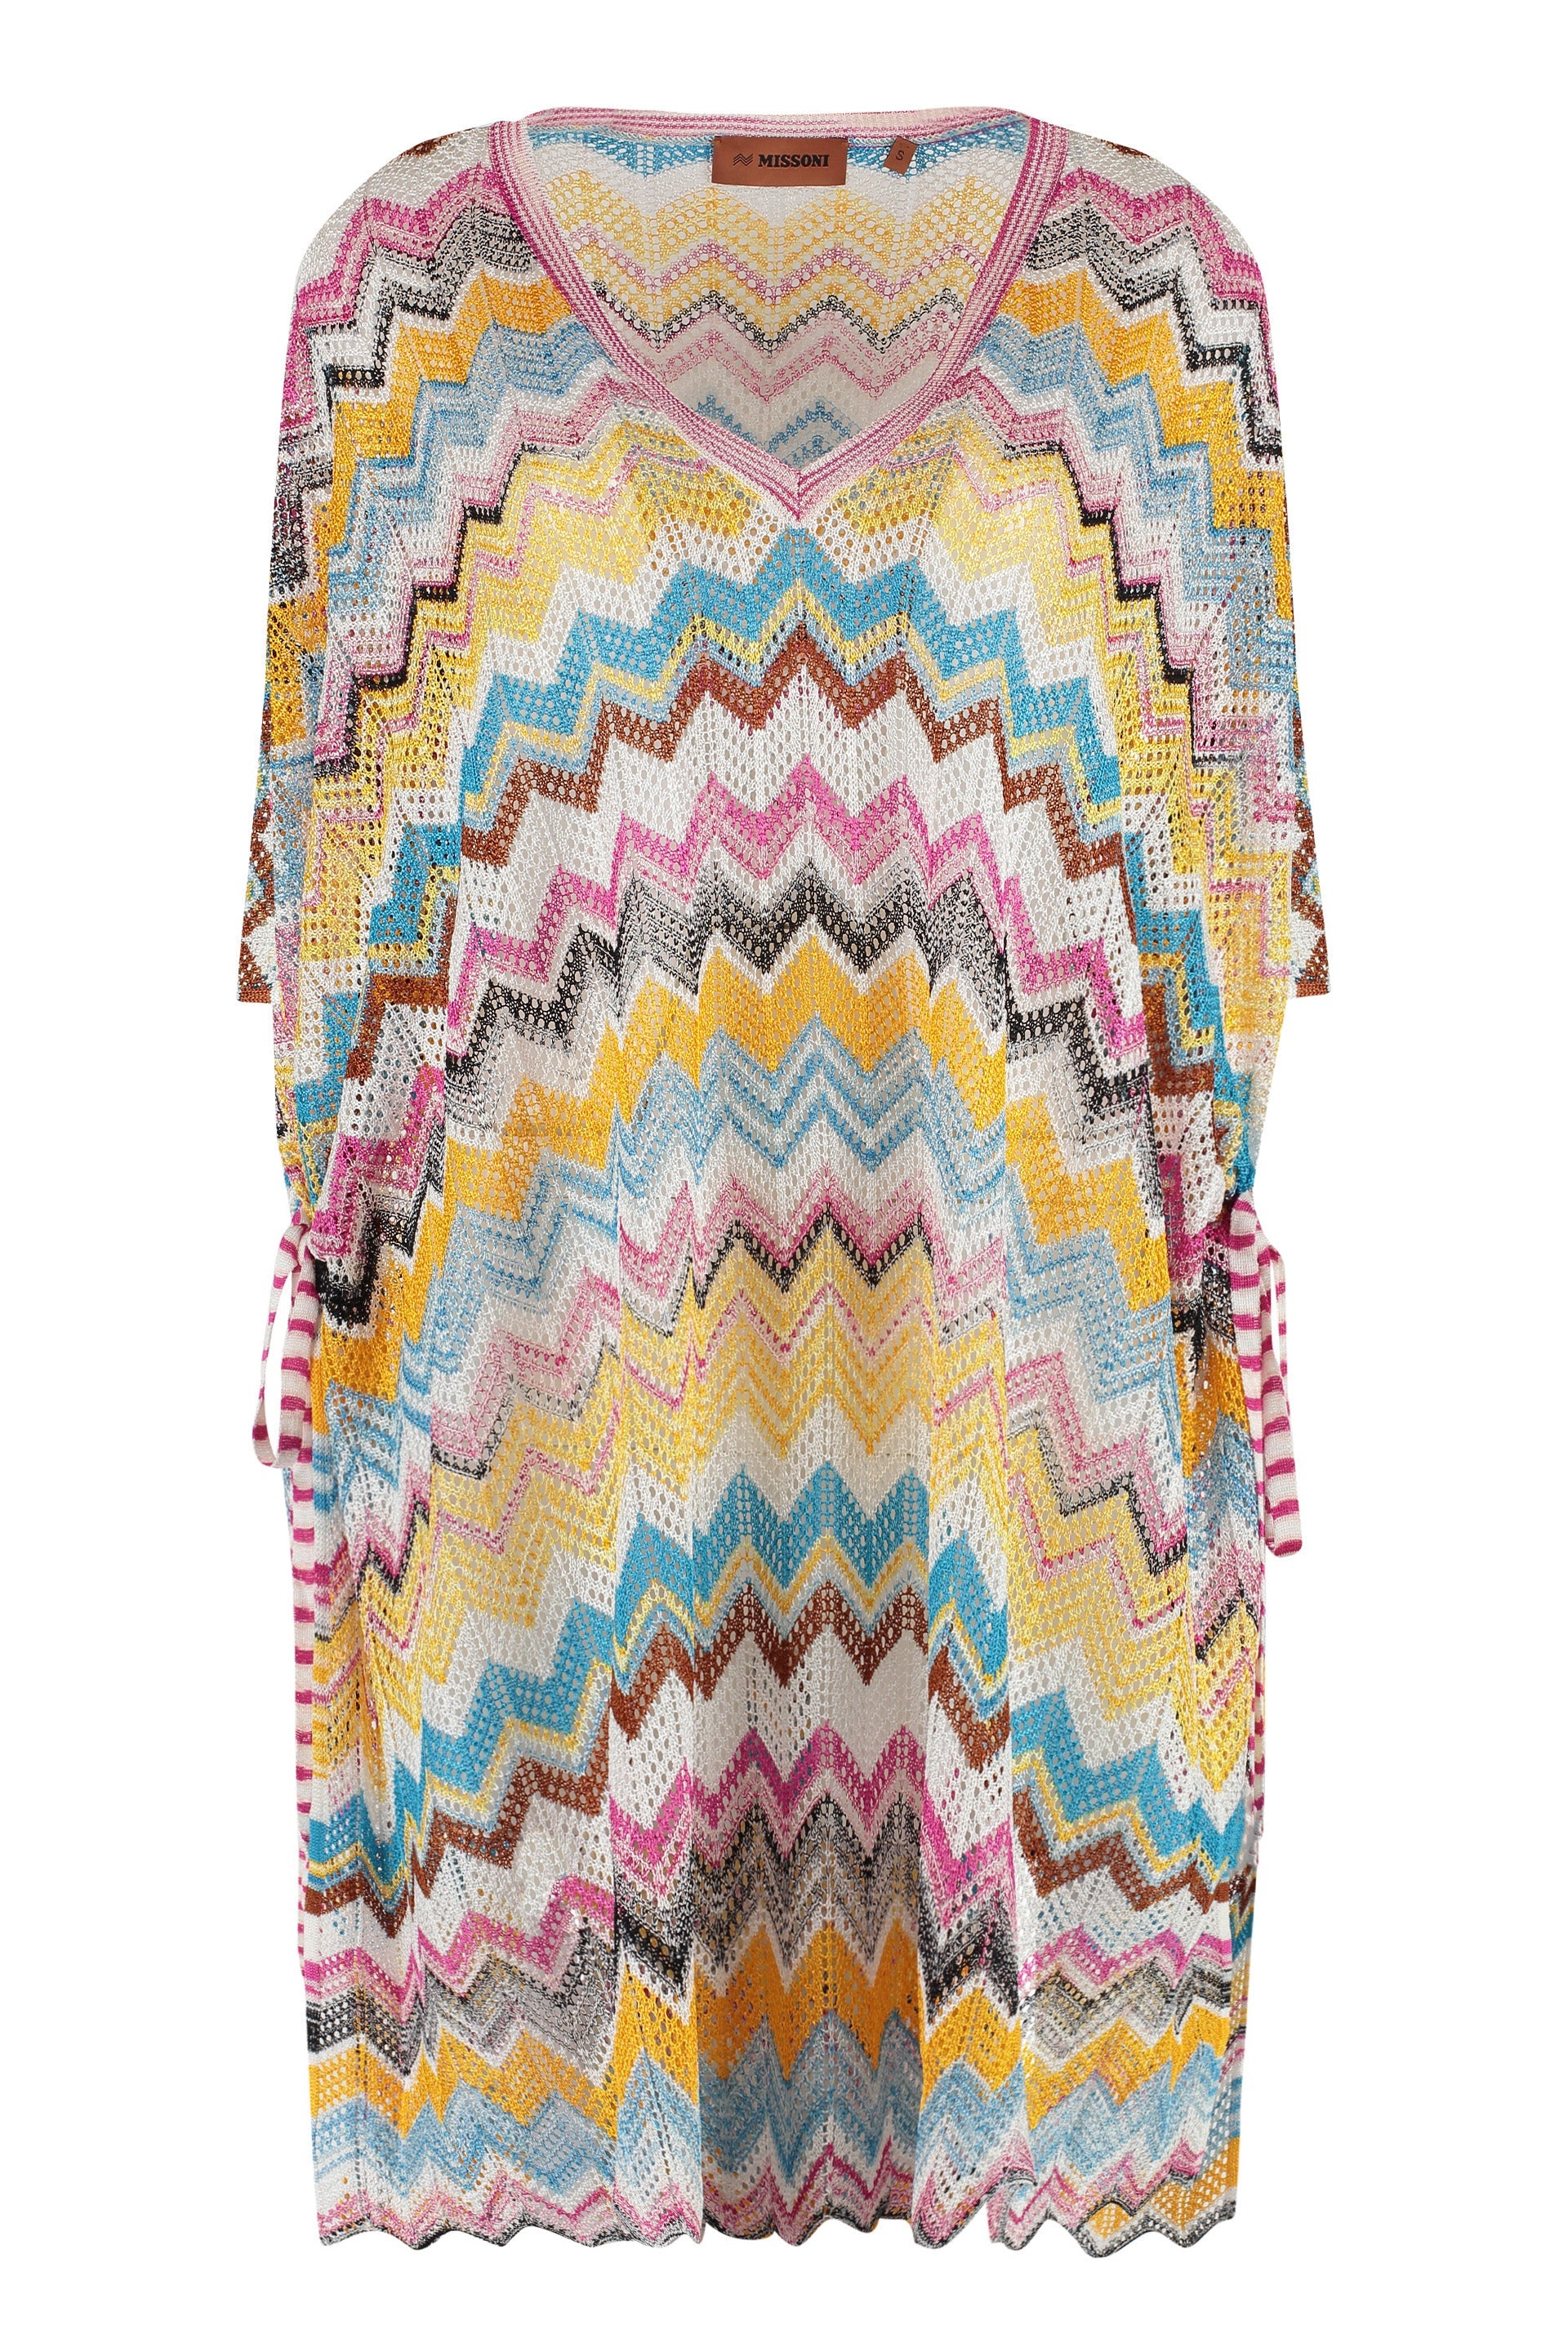 Missoni-OUTLET-SALE-Knitted-cover-up-dress-Kleider-Rocke-S-ARCHIVE-COLLECTION_5b3bdfb9-dec9-4153-90c7-fb8080f2ece3.jpg